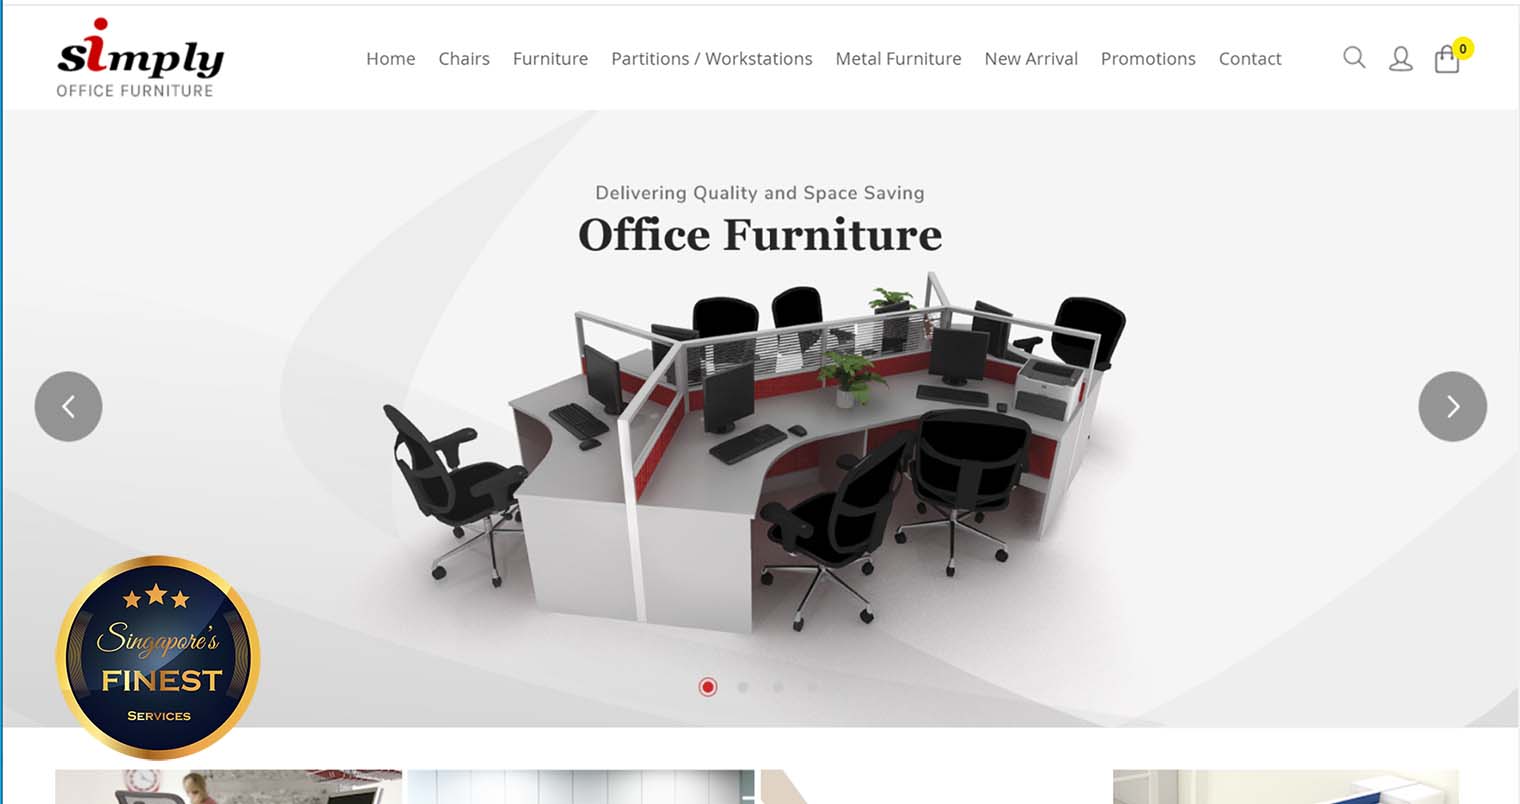 Simply Office Furniture - Office Furniture Singapore